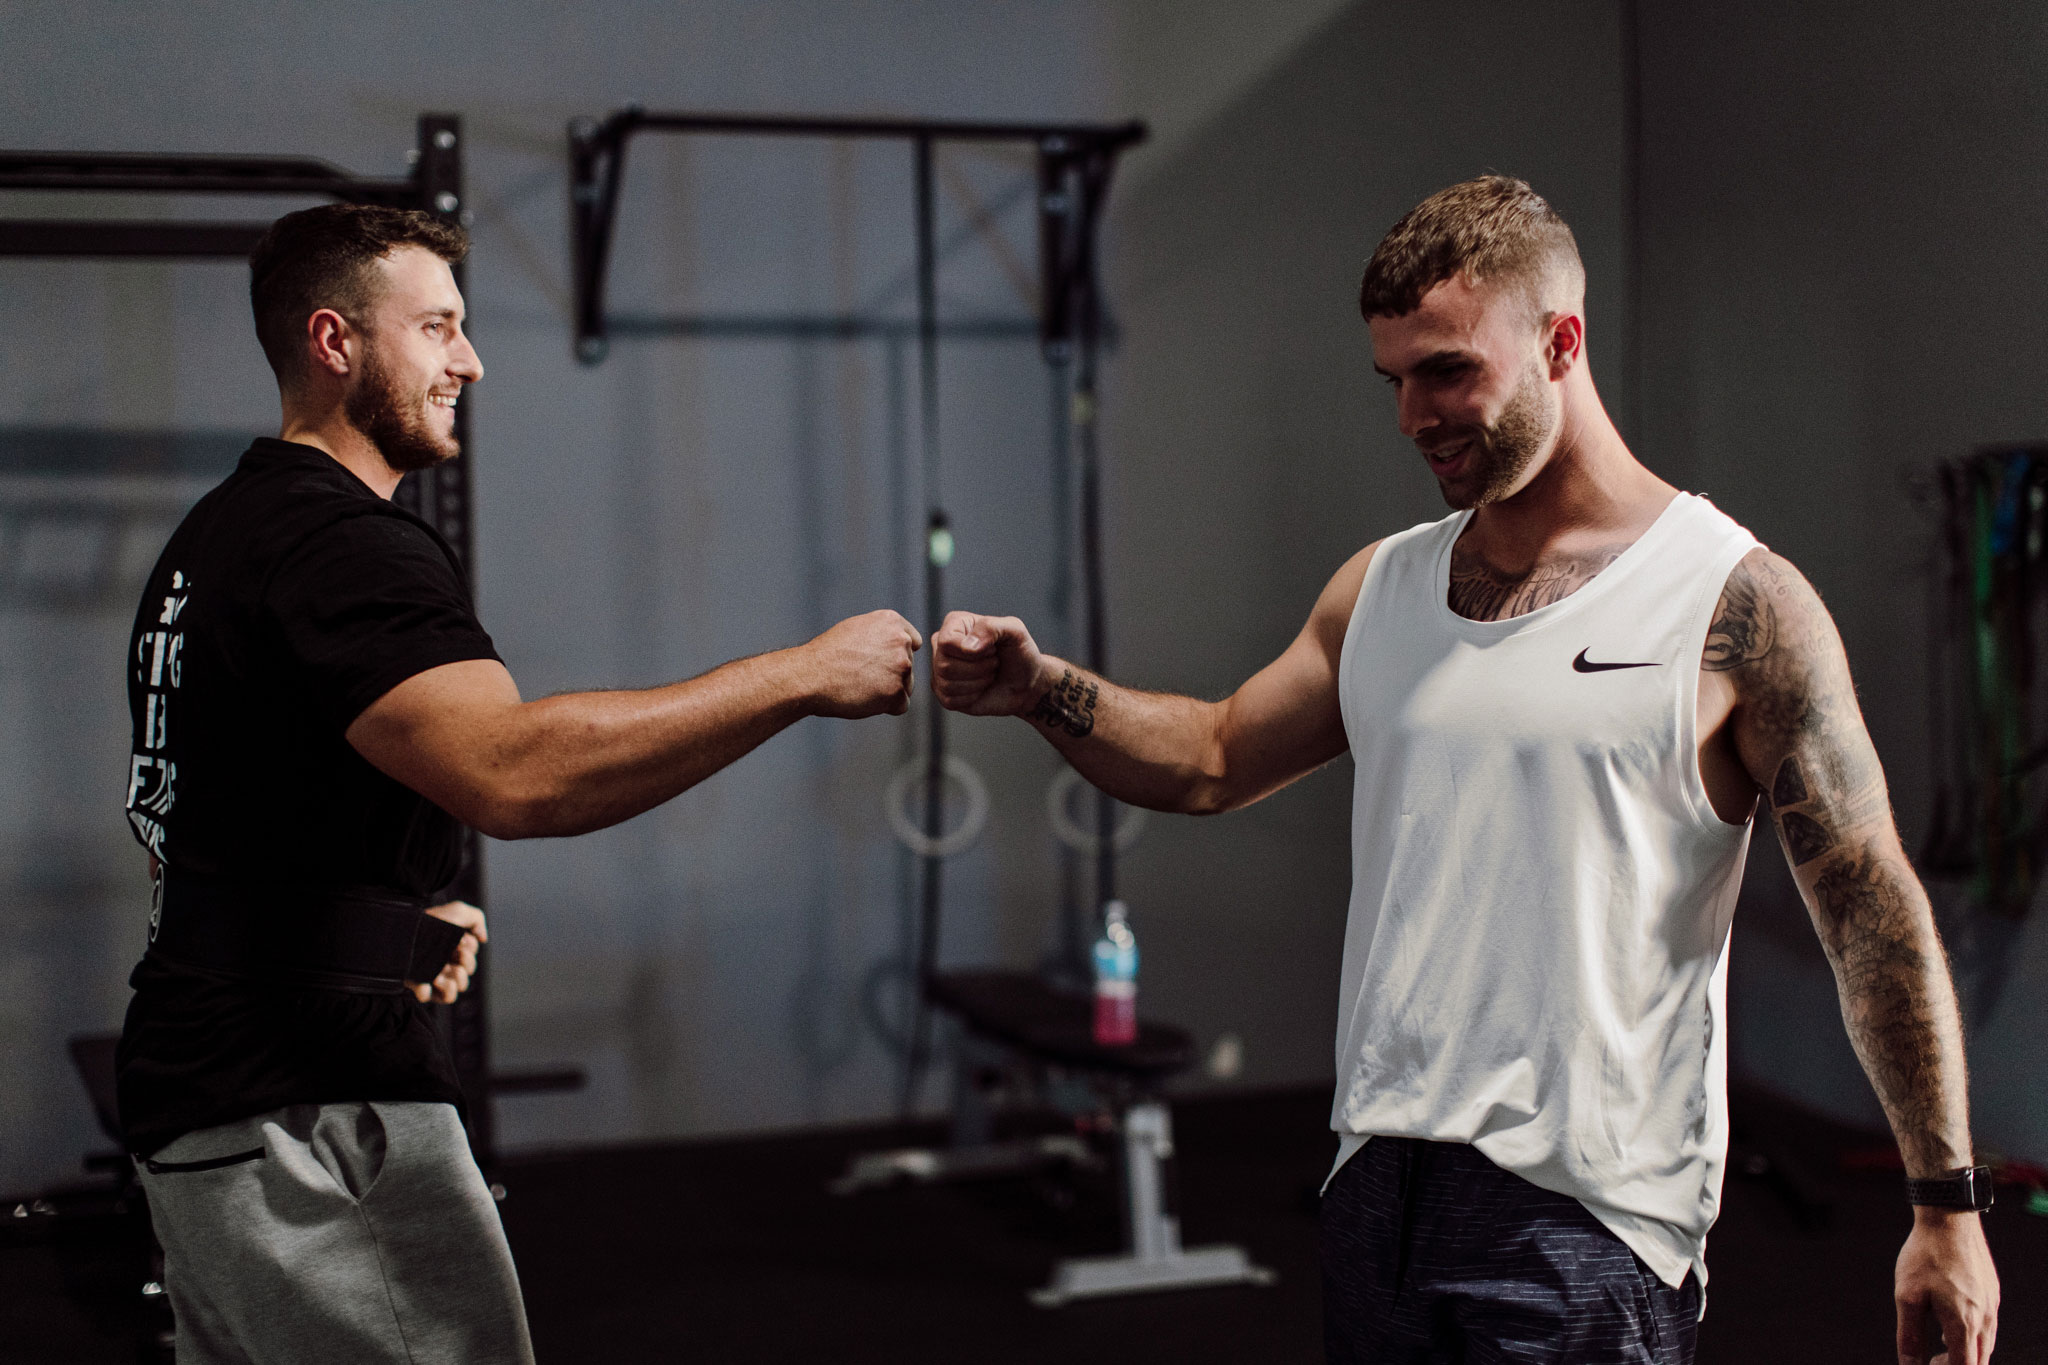 Gym partners fist bumping